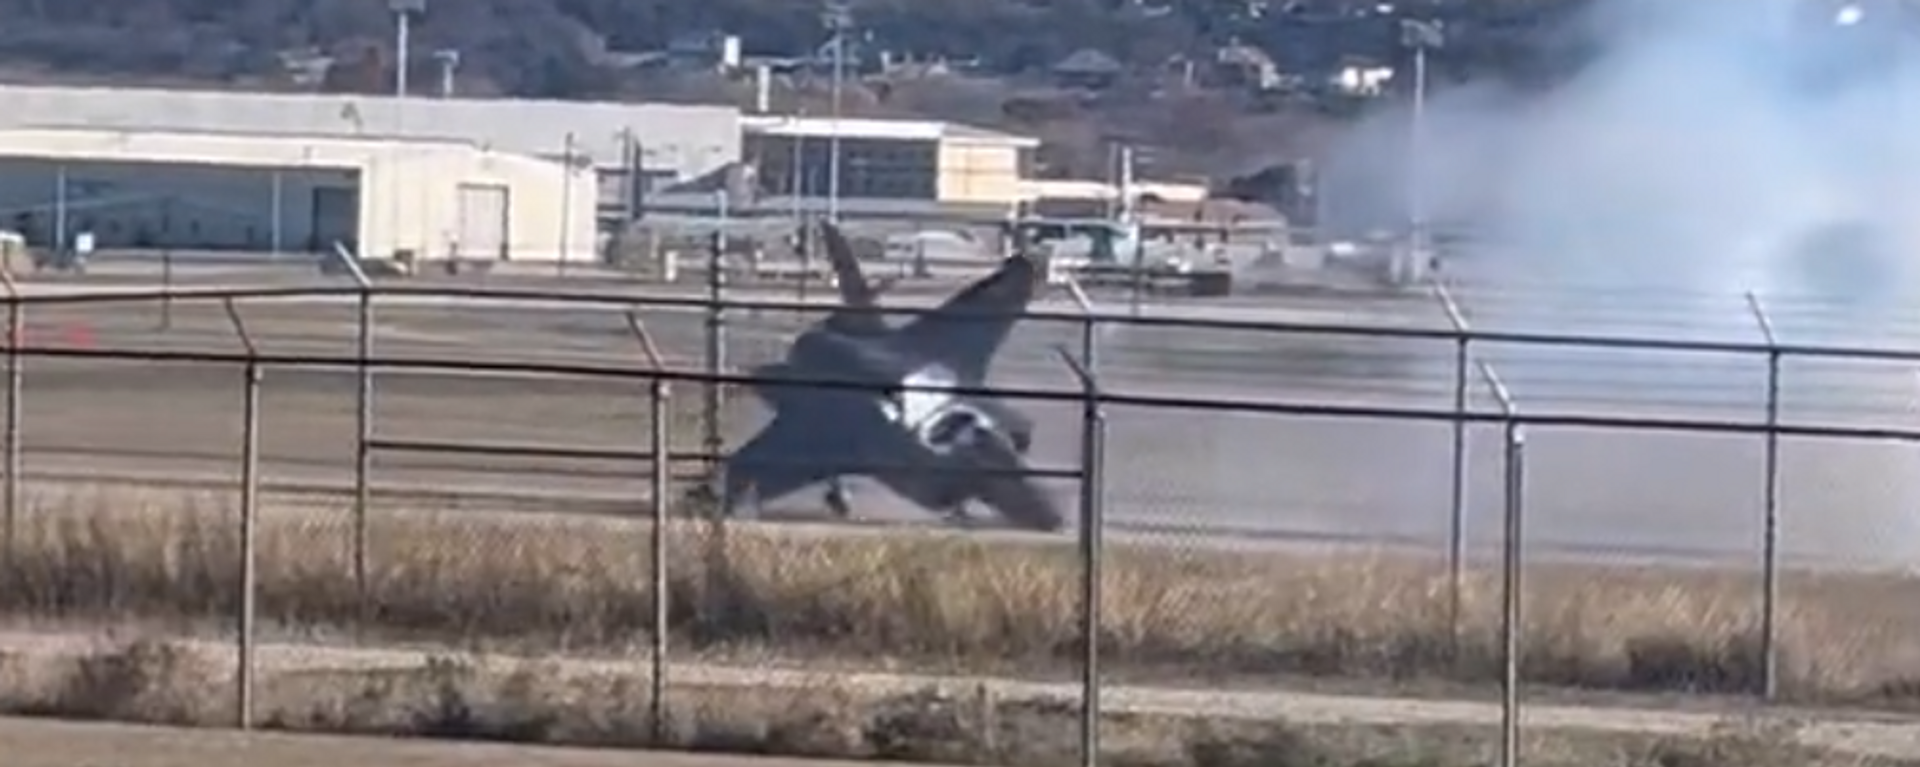 Video taken by Kitt Wilder captures the moment that an F-35B jet crashed early Thursday during a test in Texas' Fort Worth base. Although the condition of the pilot is unknown, they are seen ejected from the fighter jet. - Sputnik International, 1920, 15.12.2022